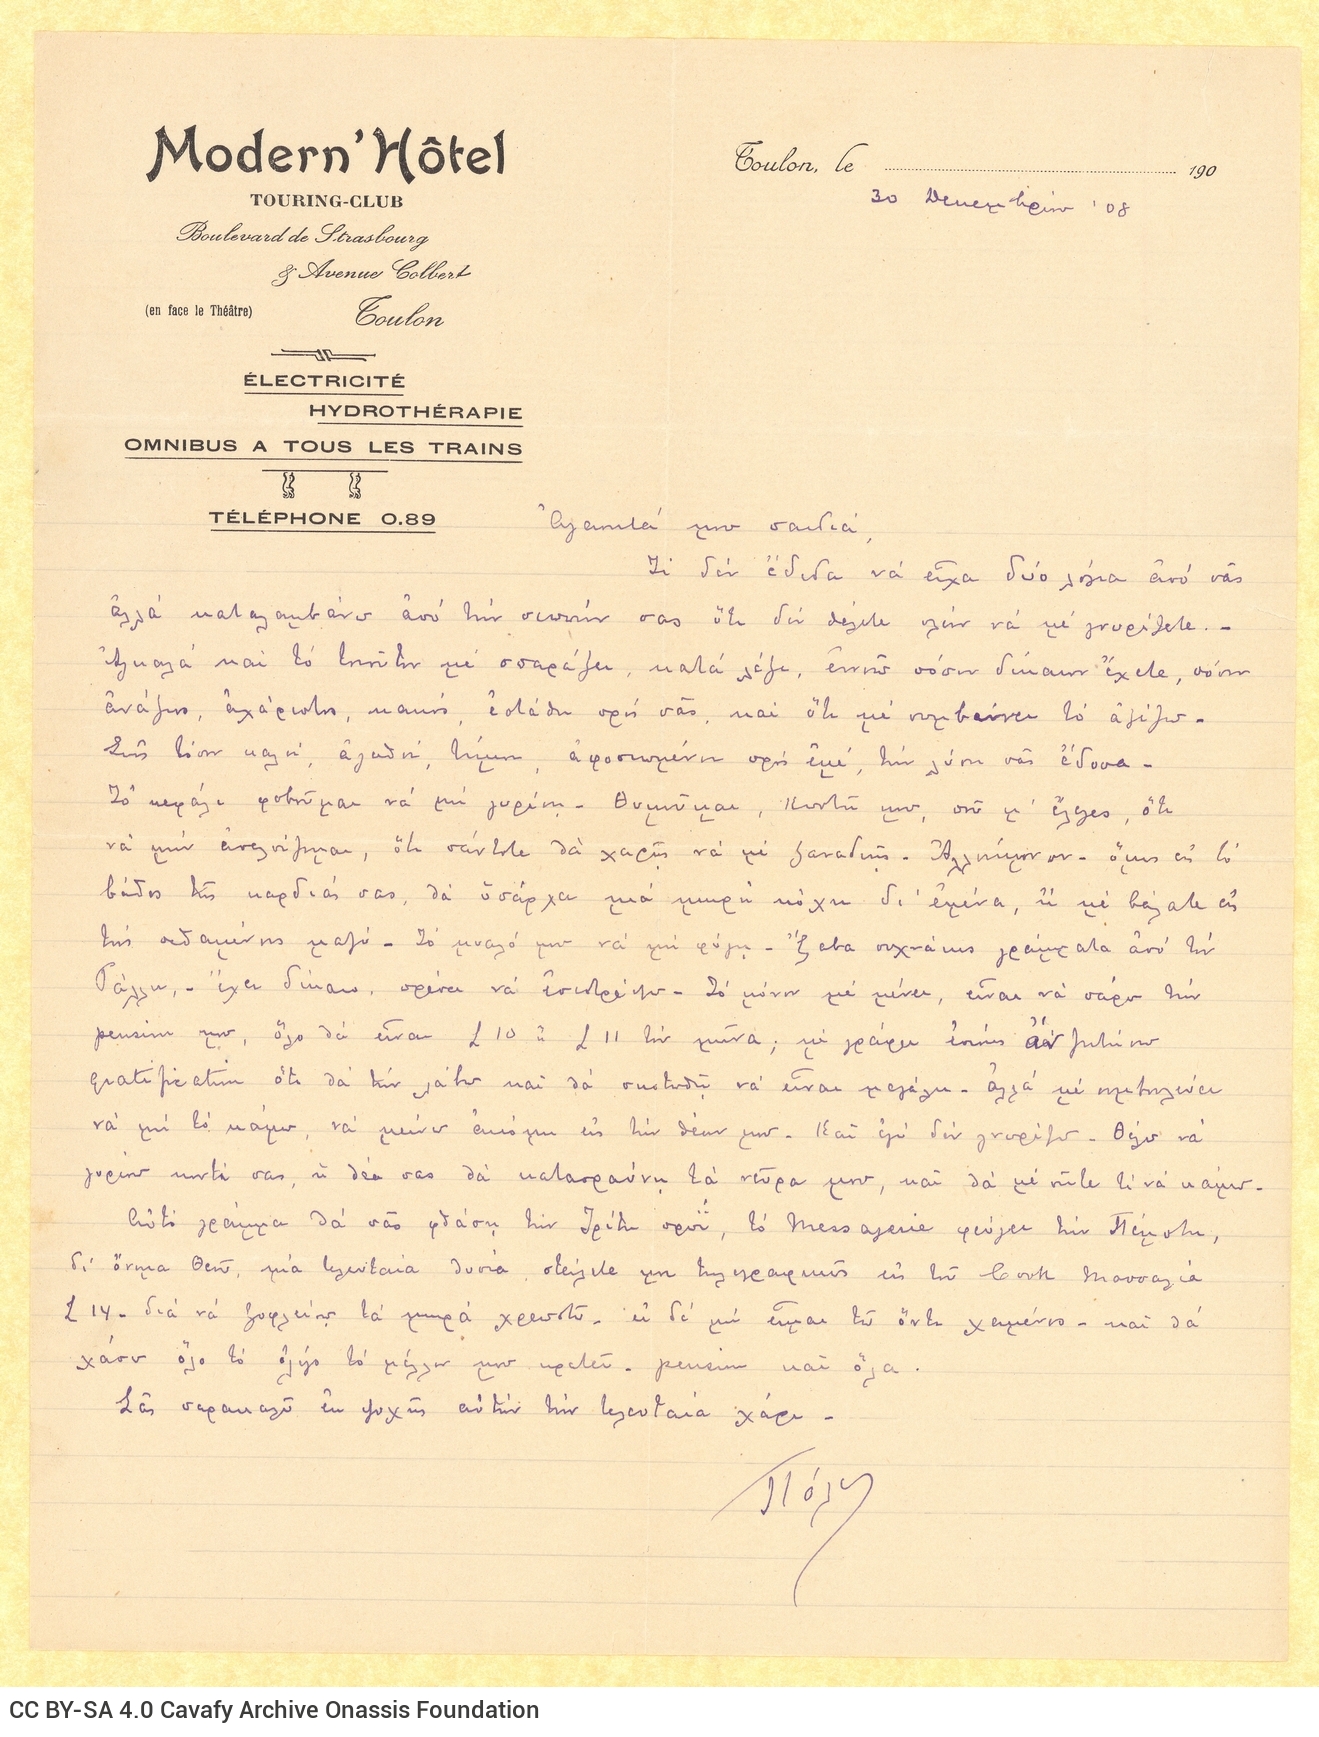 Handwritten letter by Paul Cavafy from France to C. P. Cavafy and John Cavafy. It is a continuation of previous letters, in w